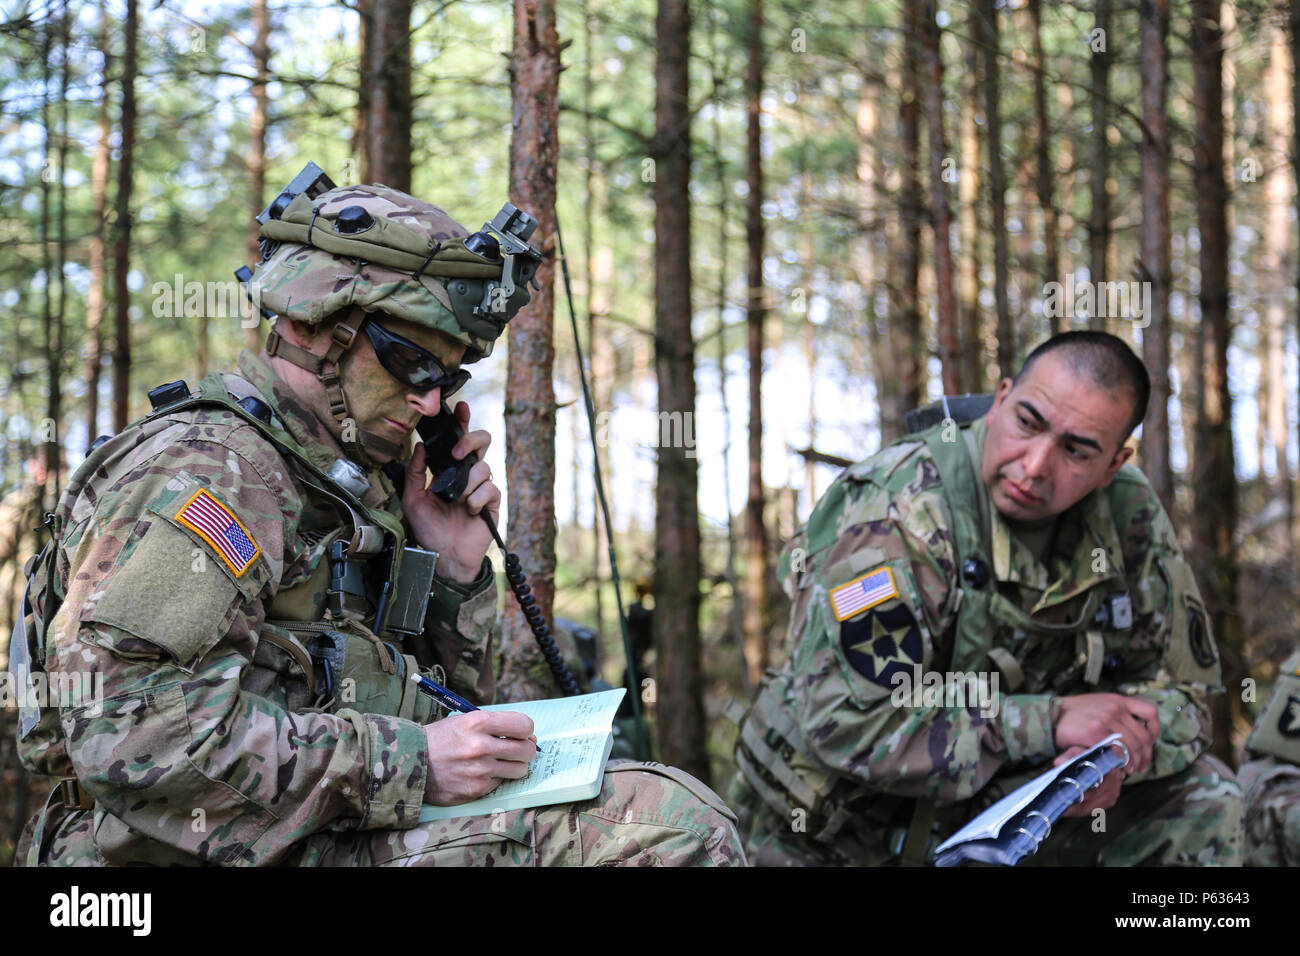 U.S. Soldiers of the 173rd Airborne Brigade discuss mission updates while conducting a pre-missions brief during exercise Saber Junction 16 at the U.S. Army’s Joint Multinational Readiness Center (JMRC) in Hohenfels, Germany, April 13, 2016. Saber Junction 16 is the U.S. Army Europe’s 173rd Airborne Brigade’s combat training center certification exercise, taking place at the JMRC in Hohenfels, Germany, Mar. 31-Apr. 24, 2016.  The exercise is designed to evaluate the readiness of the Army’s Europe-based combat brigades to conduct unified land operations and promote interoperability in a joint,  Stock Photo